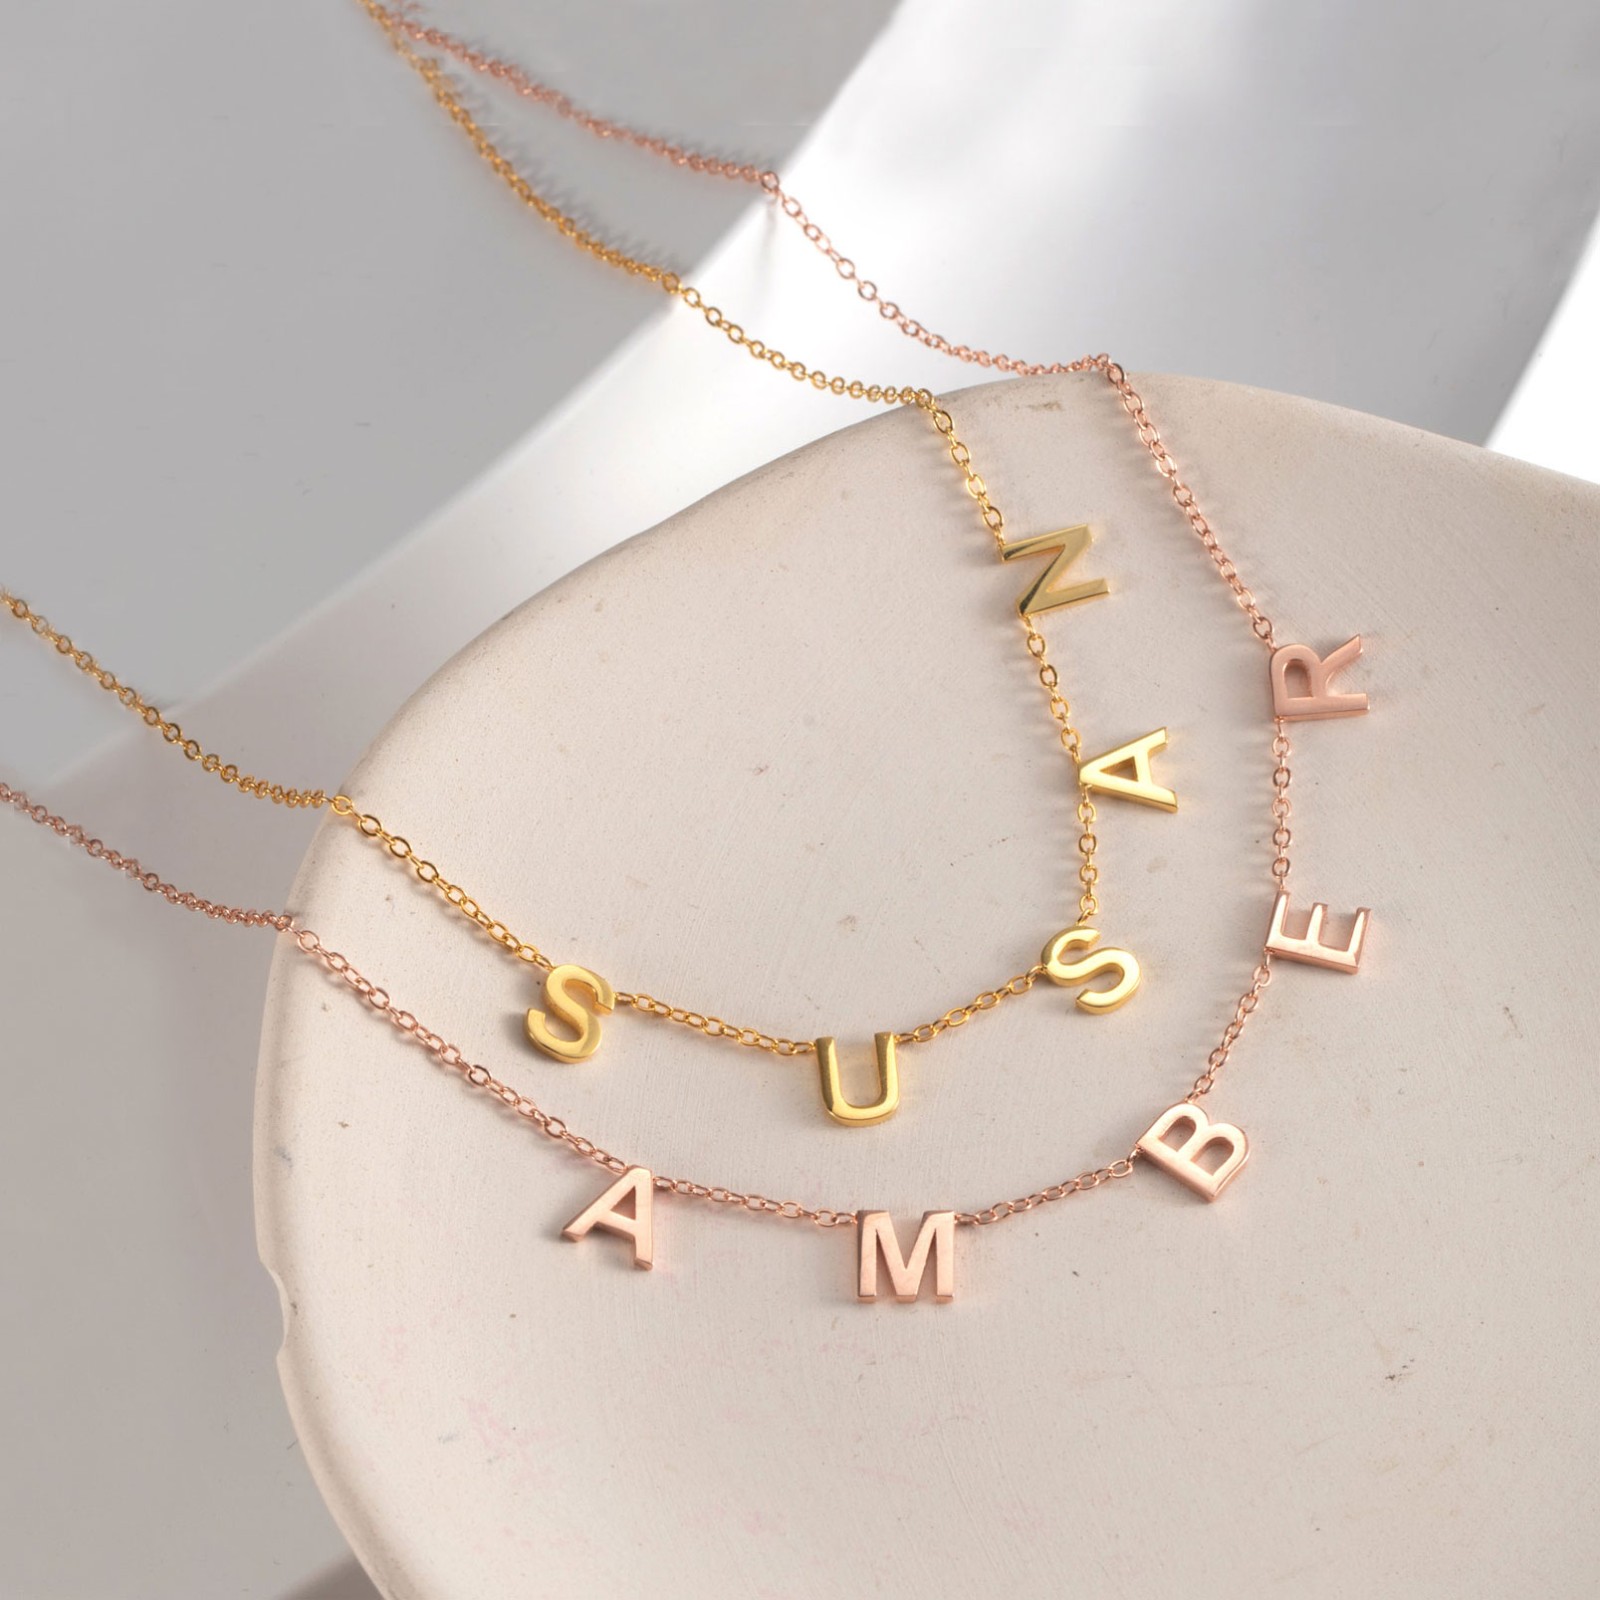 Personalized 1-8 Initial Name Necklace, Sterling Silver 925 Letter Necklace for Woman, Minimalist Letter Jewelry, Birthday/Christmas Gift for Women/Girls